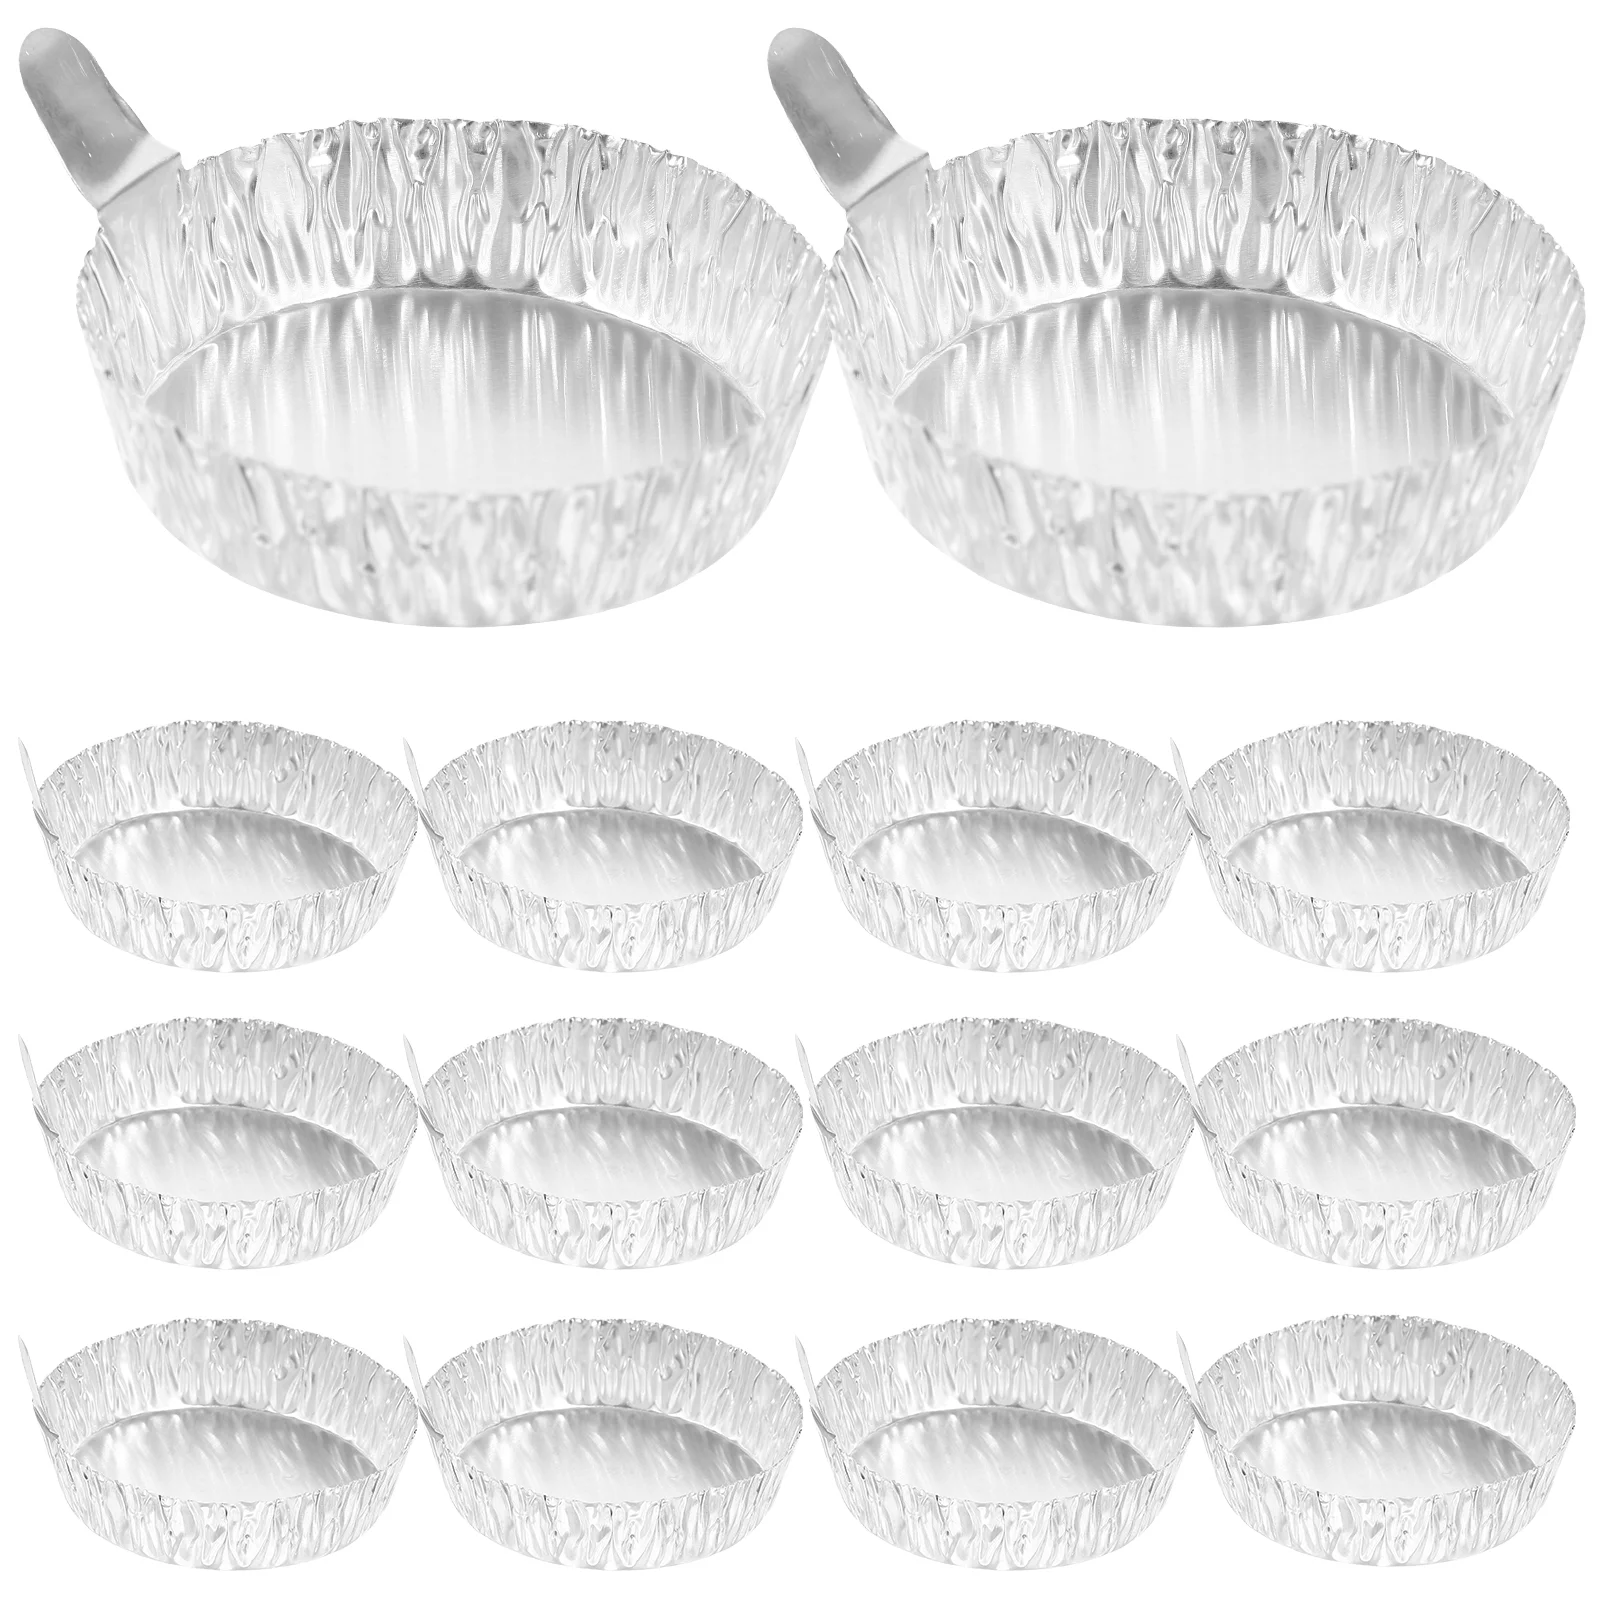 

100pcs Weighing Plates Aluminum Foil Sample Weighing Trays Laboratory Balance Weighing Dishes with Handle(42ml)